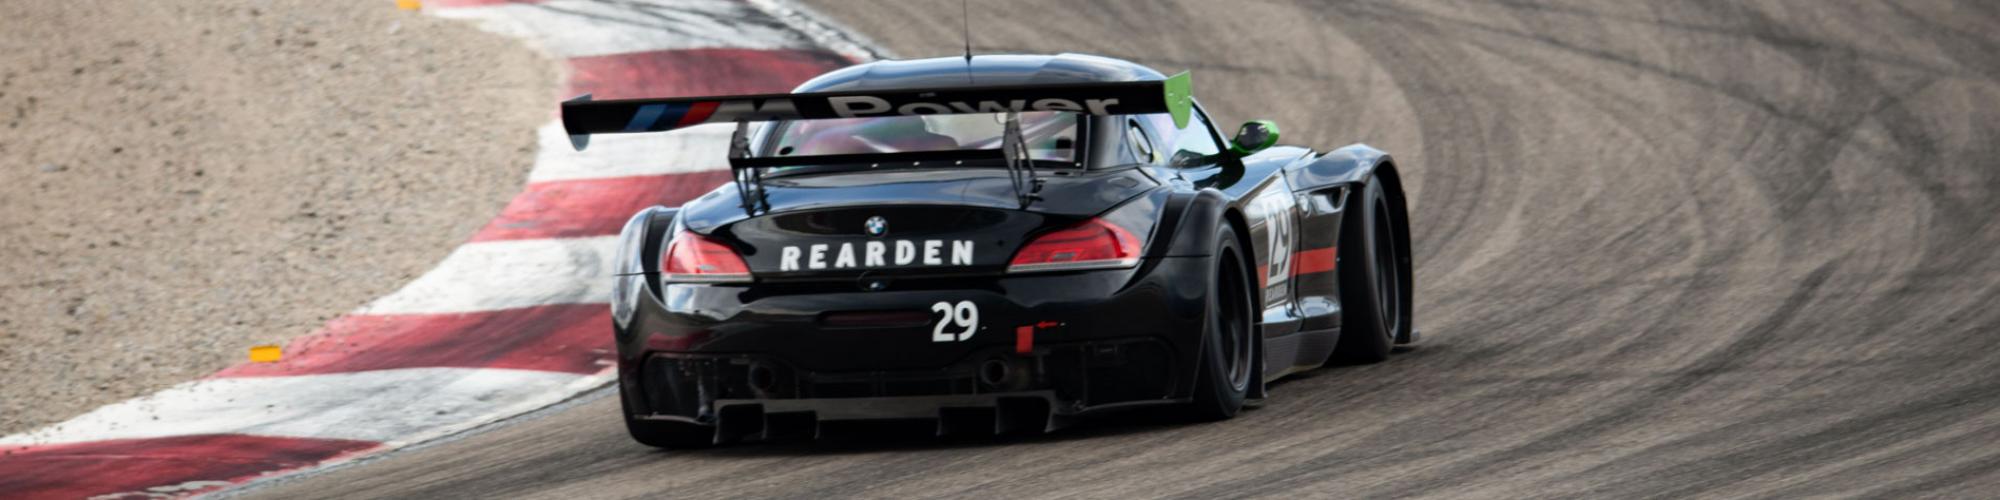 Rearden Racing cover image